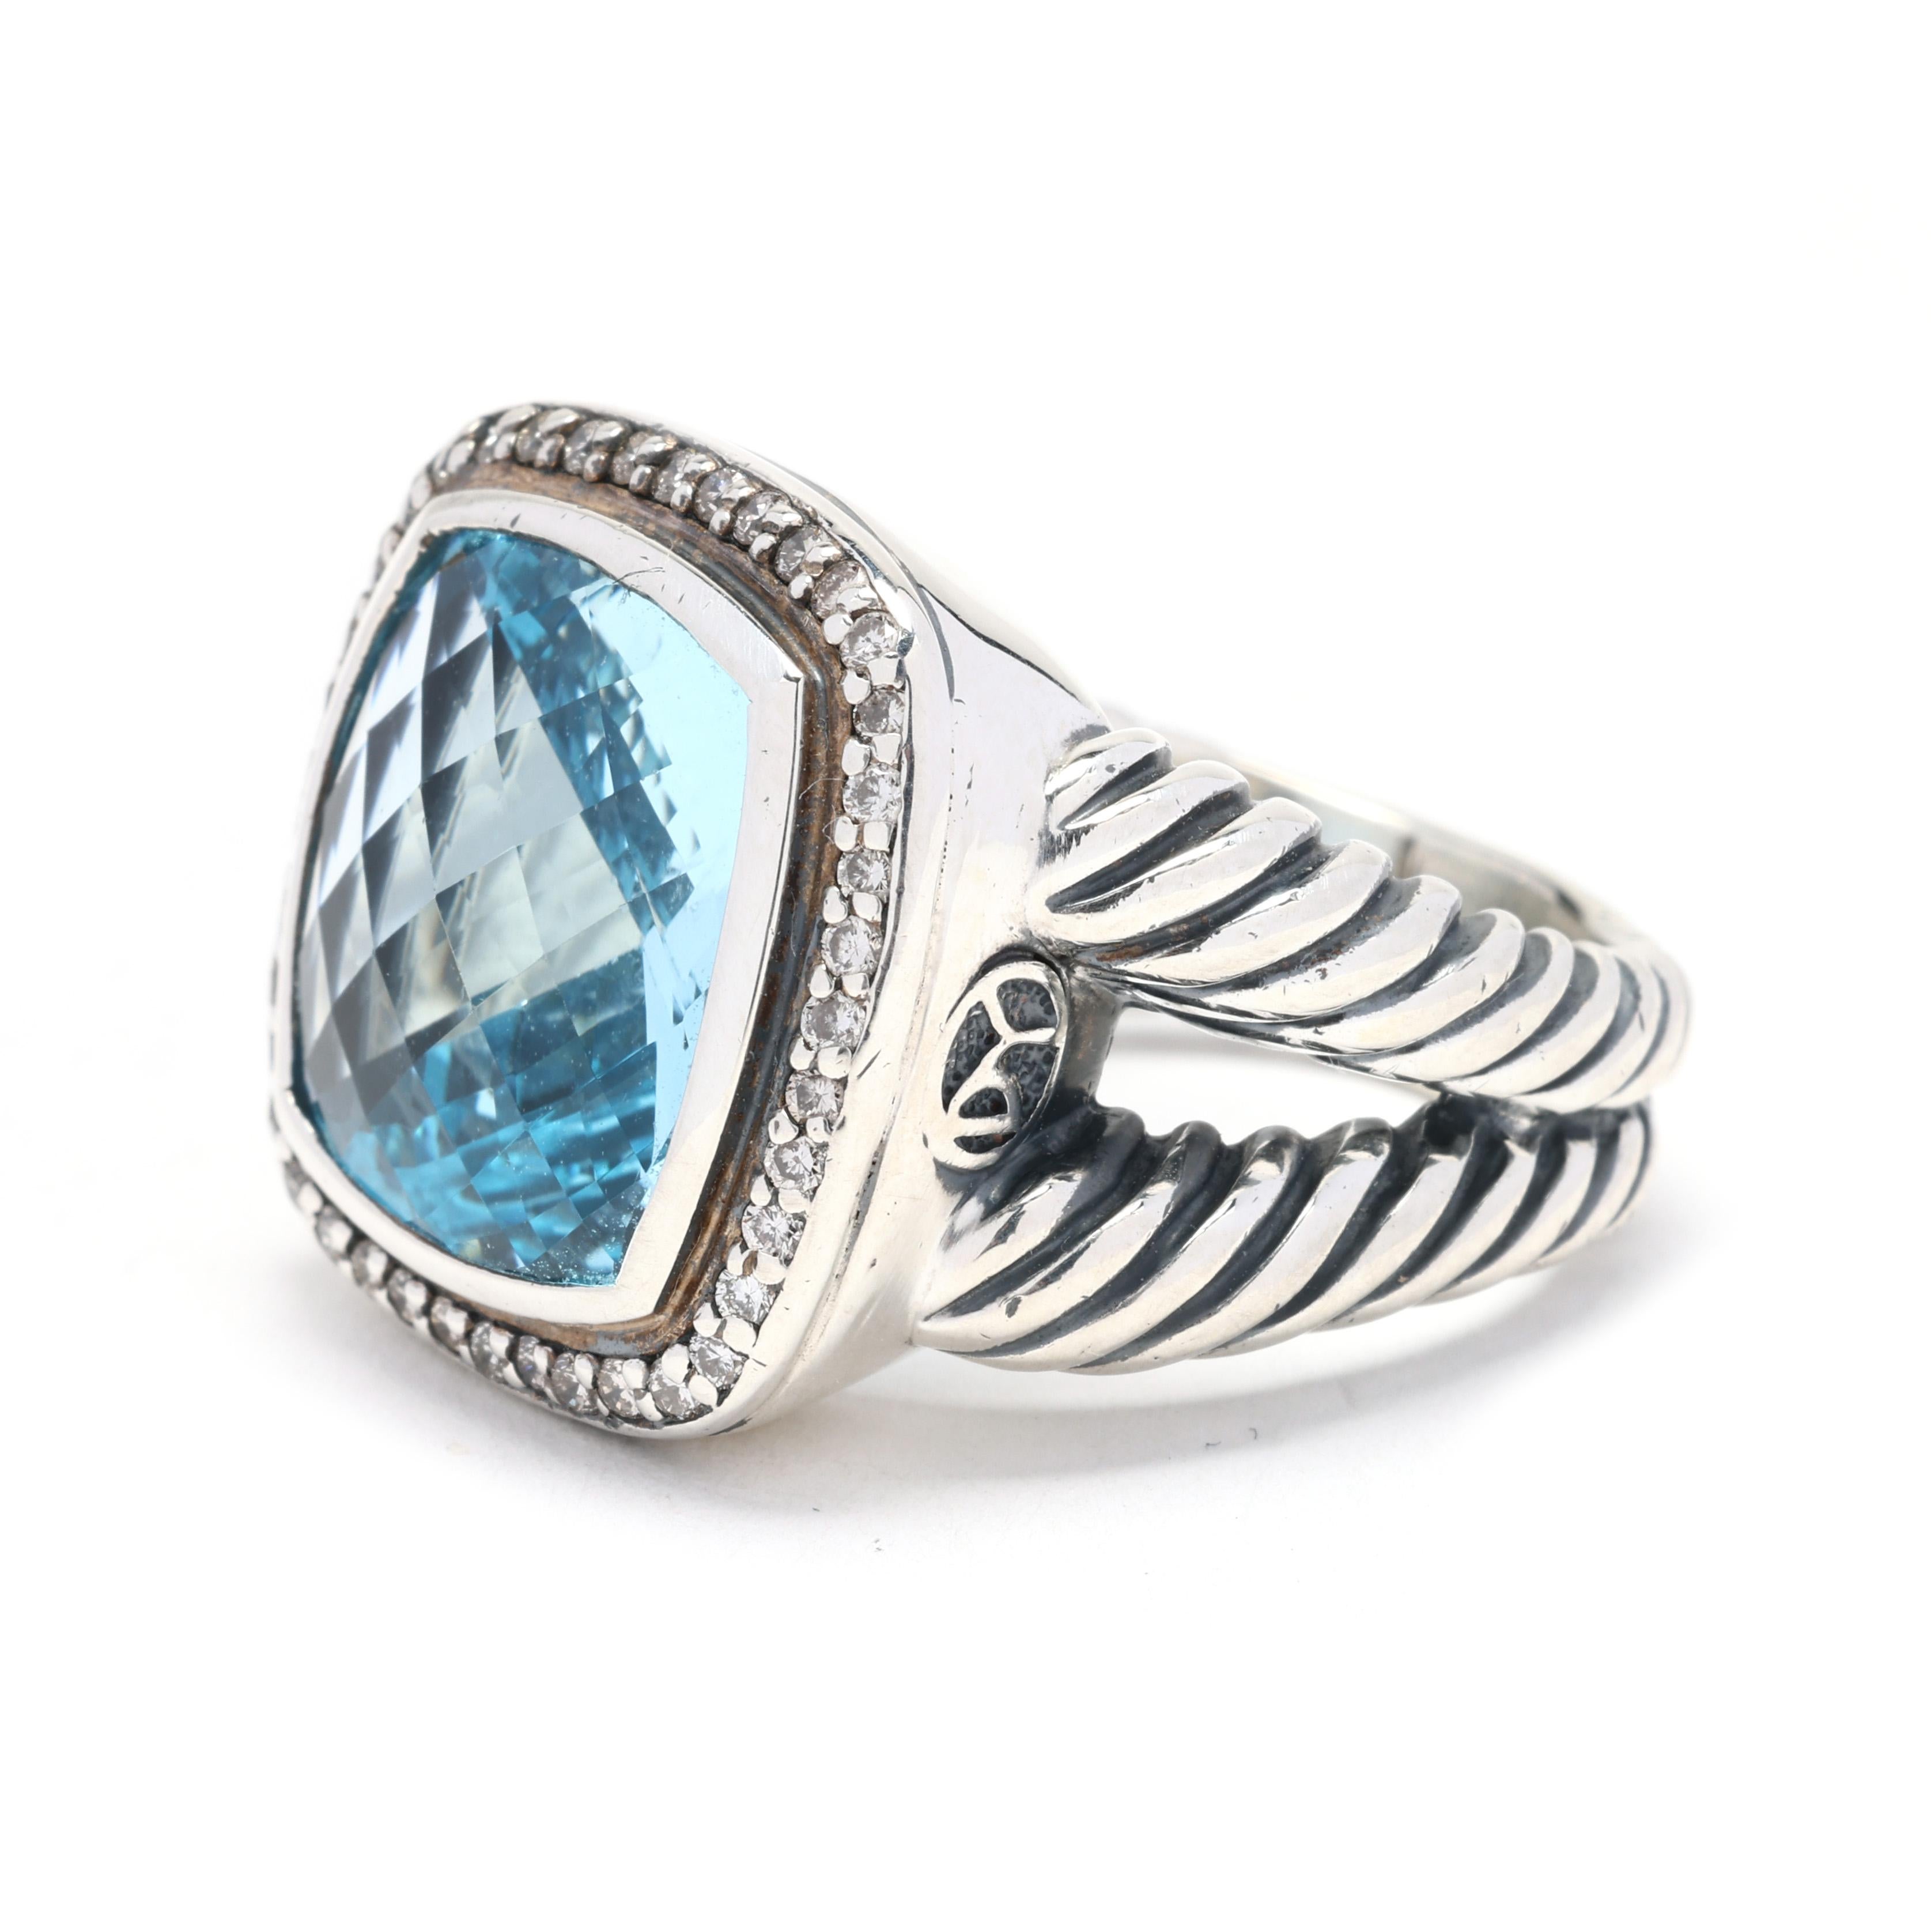 David Yurman 13.85ctw Blue Topaz and Diamond Ring, SterlingSilver 18k White Gold In Good Condition For Sale In McLeansville, NC